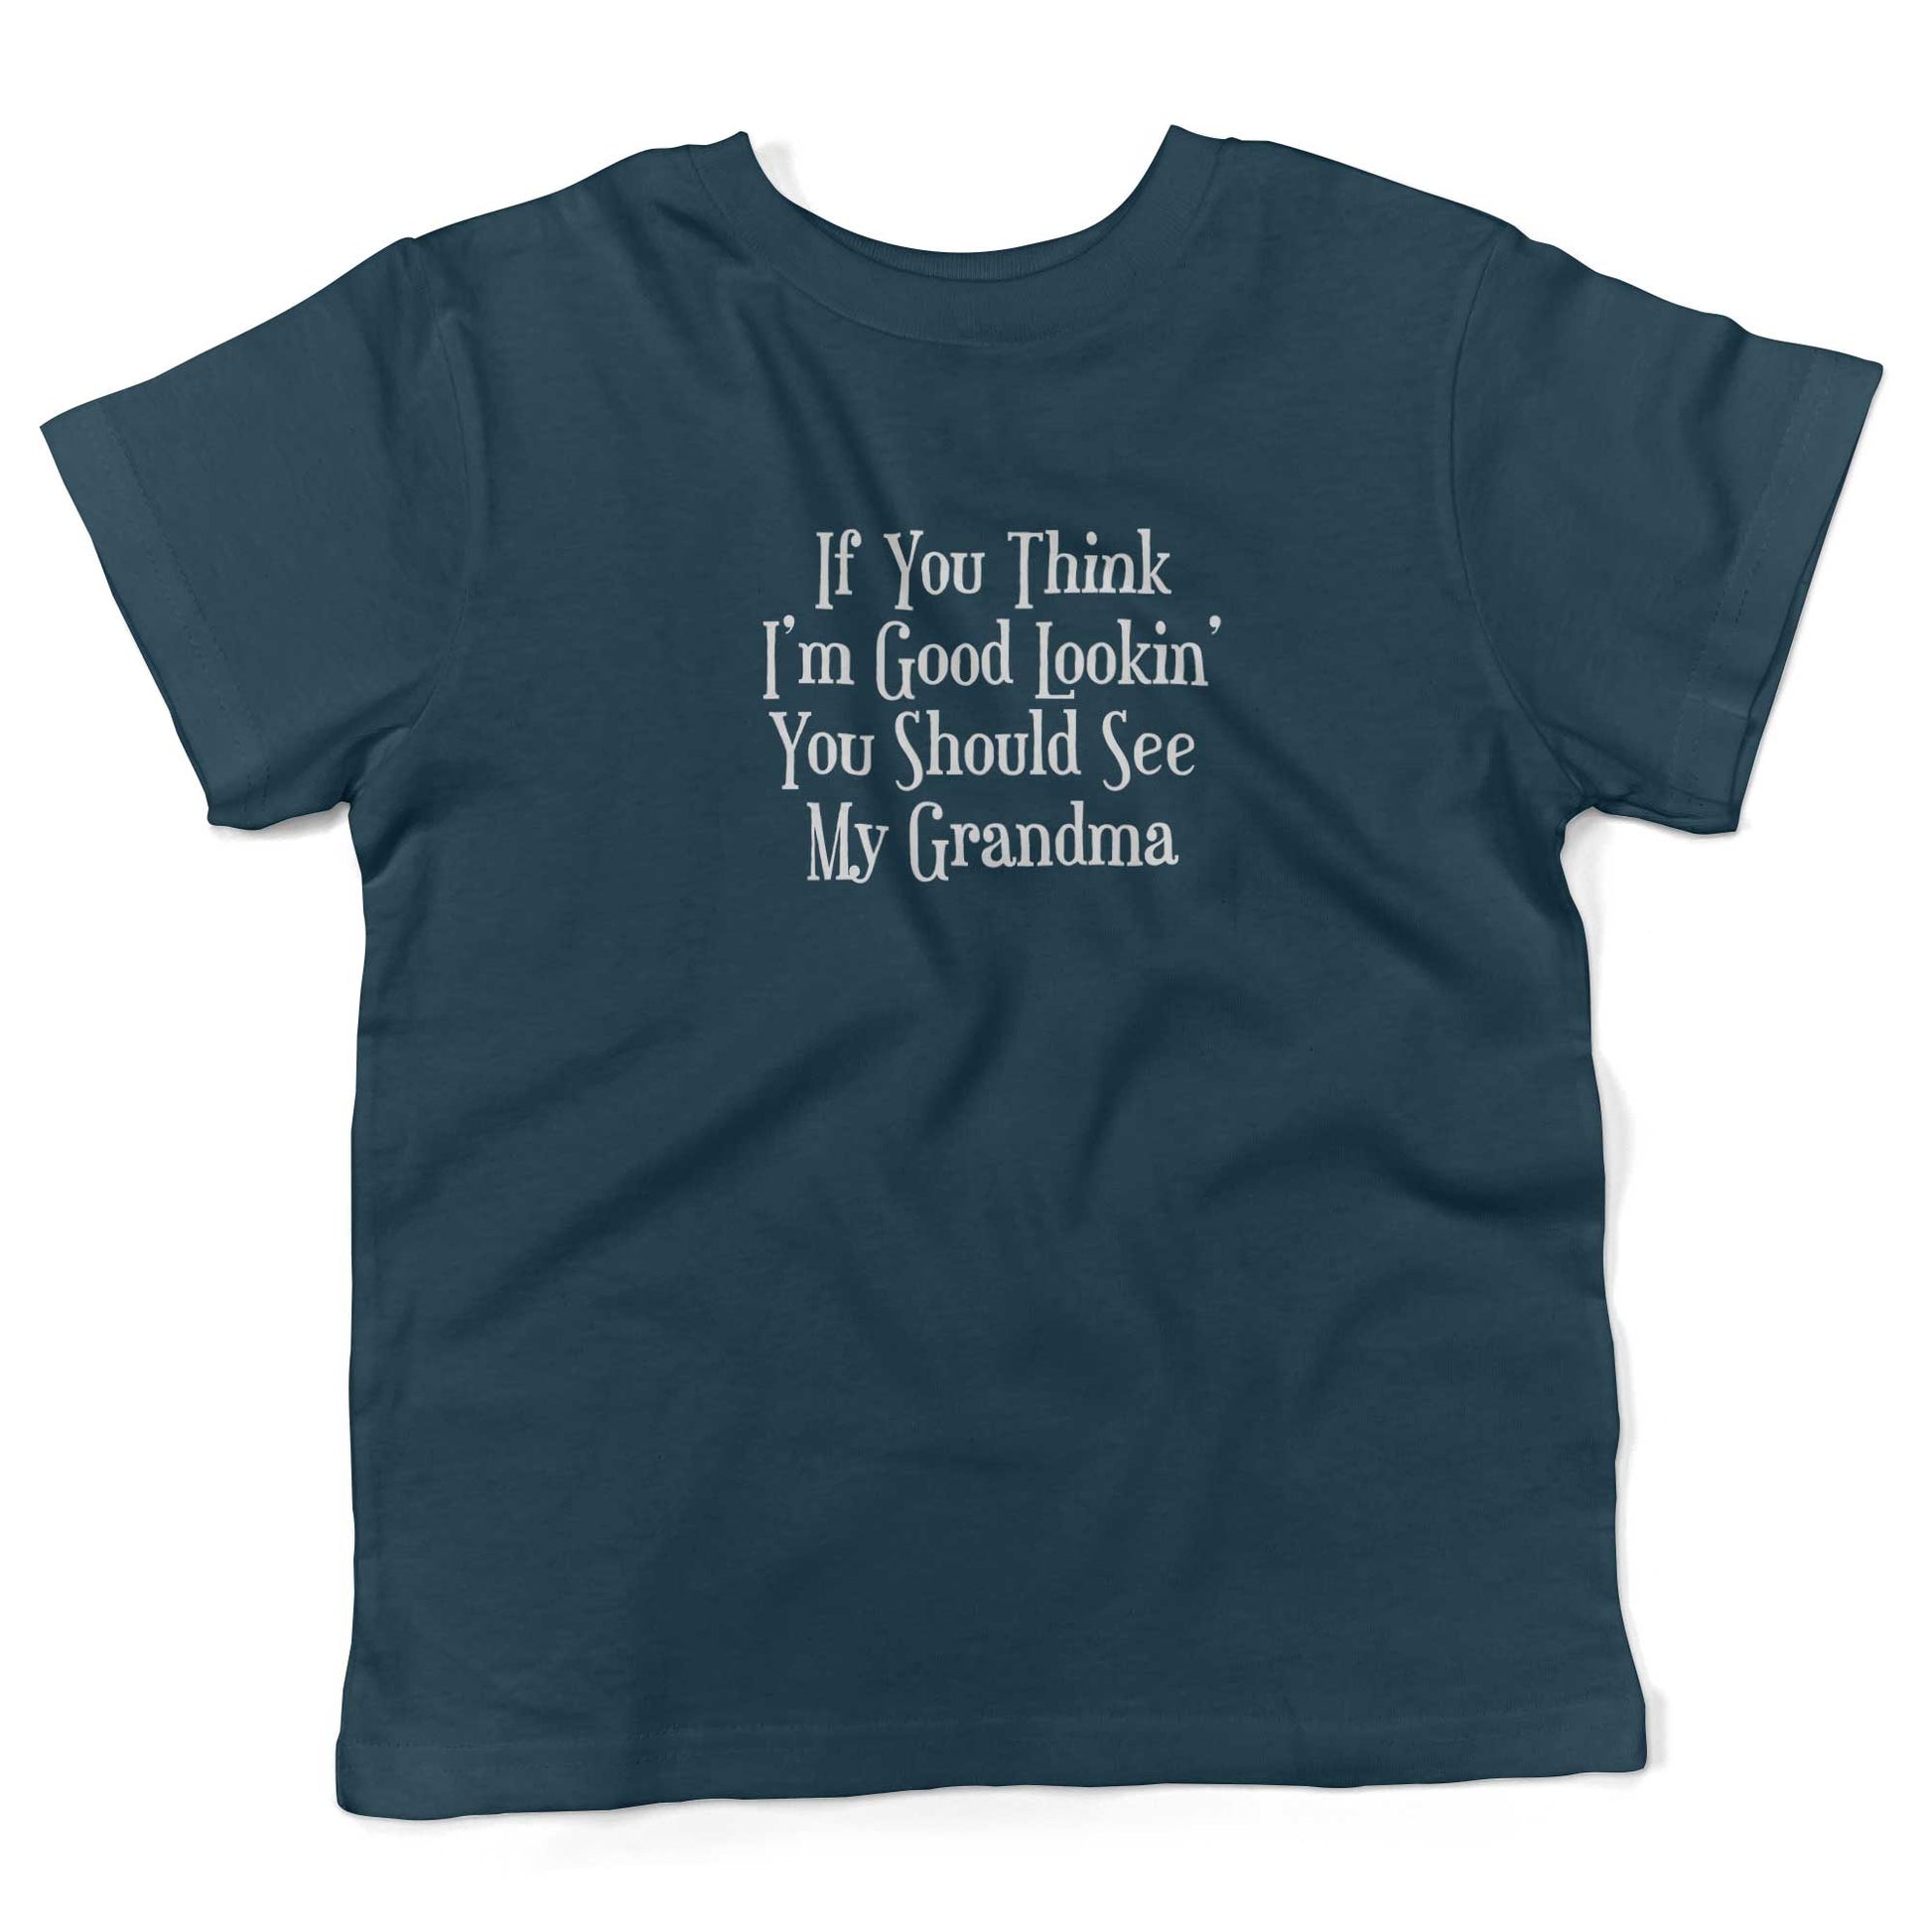 If You Think I'm Good Lookin', You Should See My Grandma Toddler Shirt-Organic Pacific Blue-2T